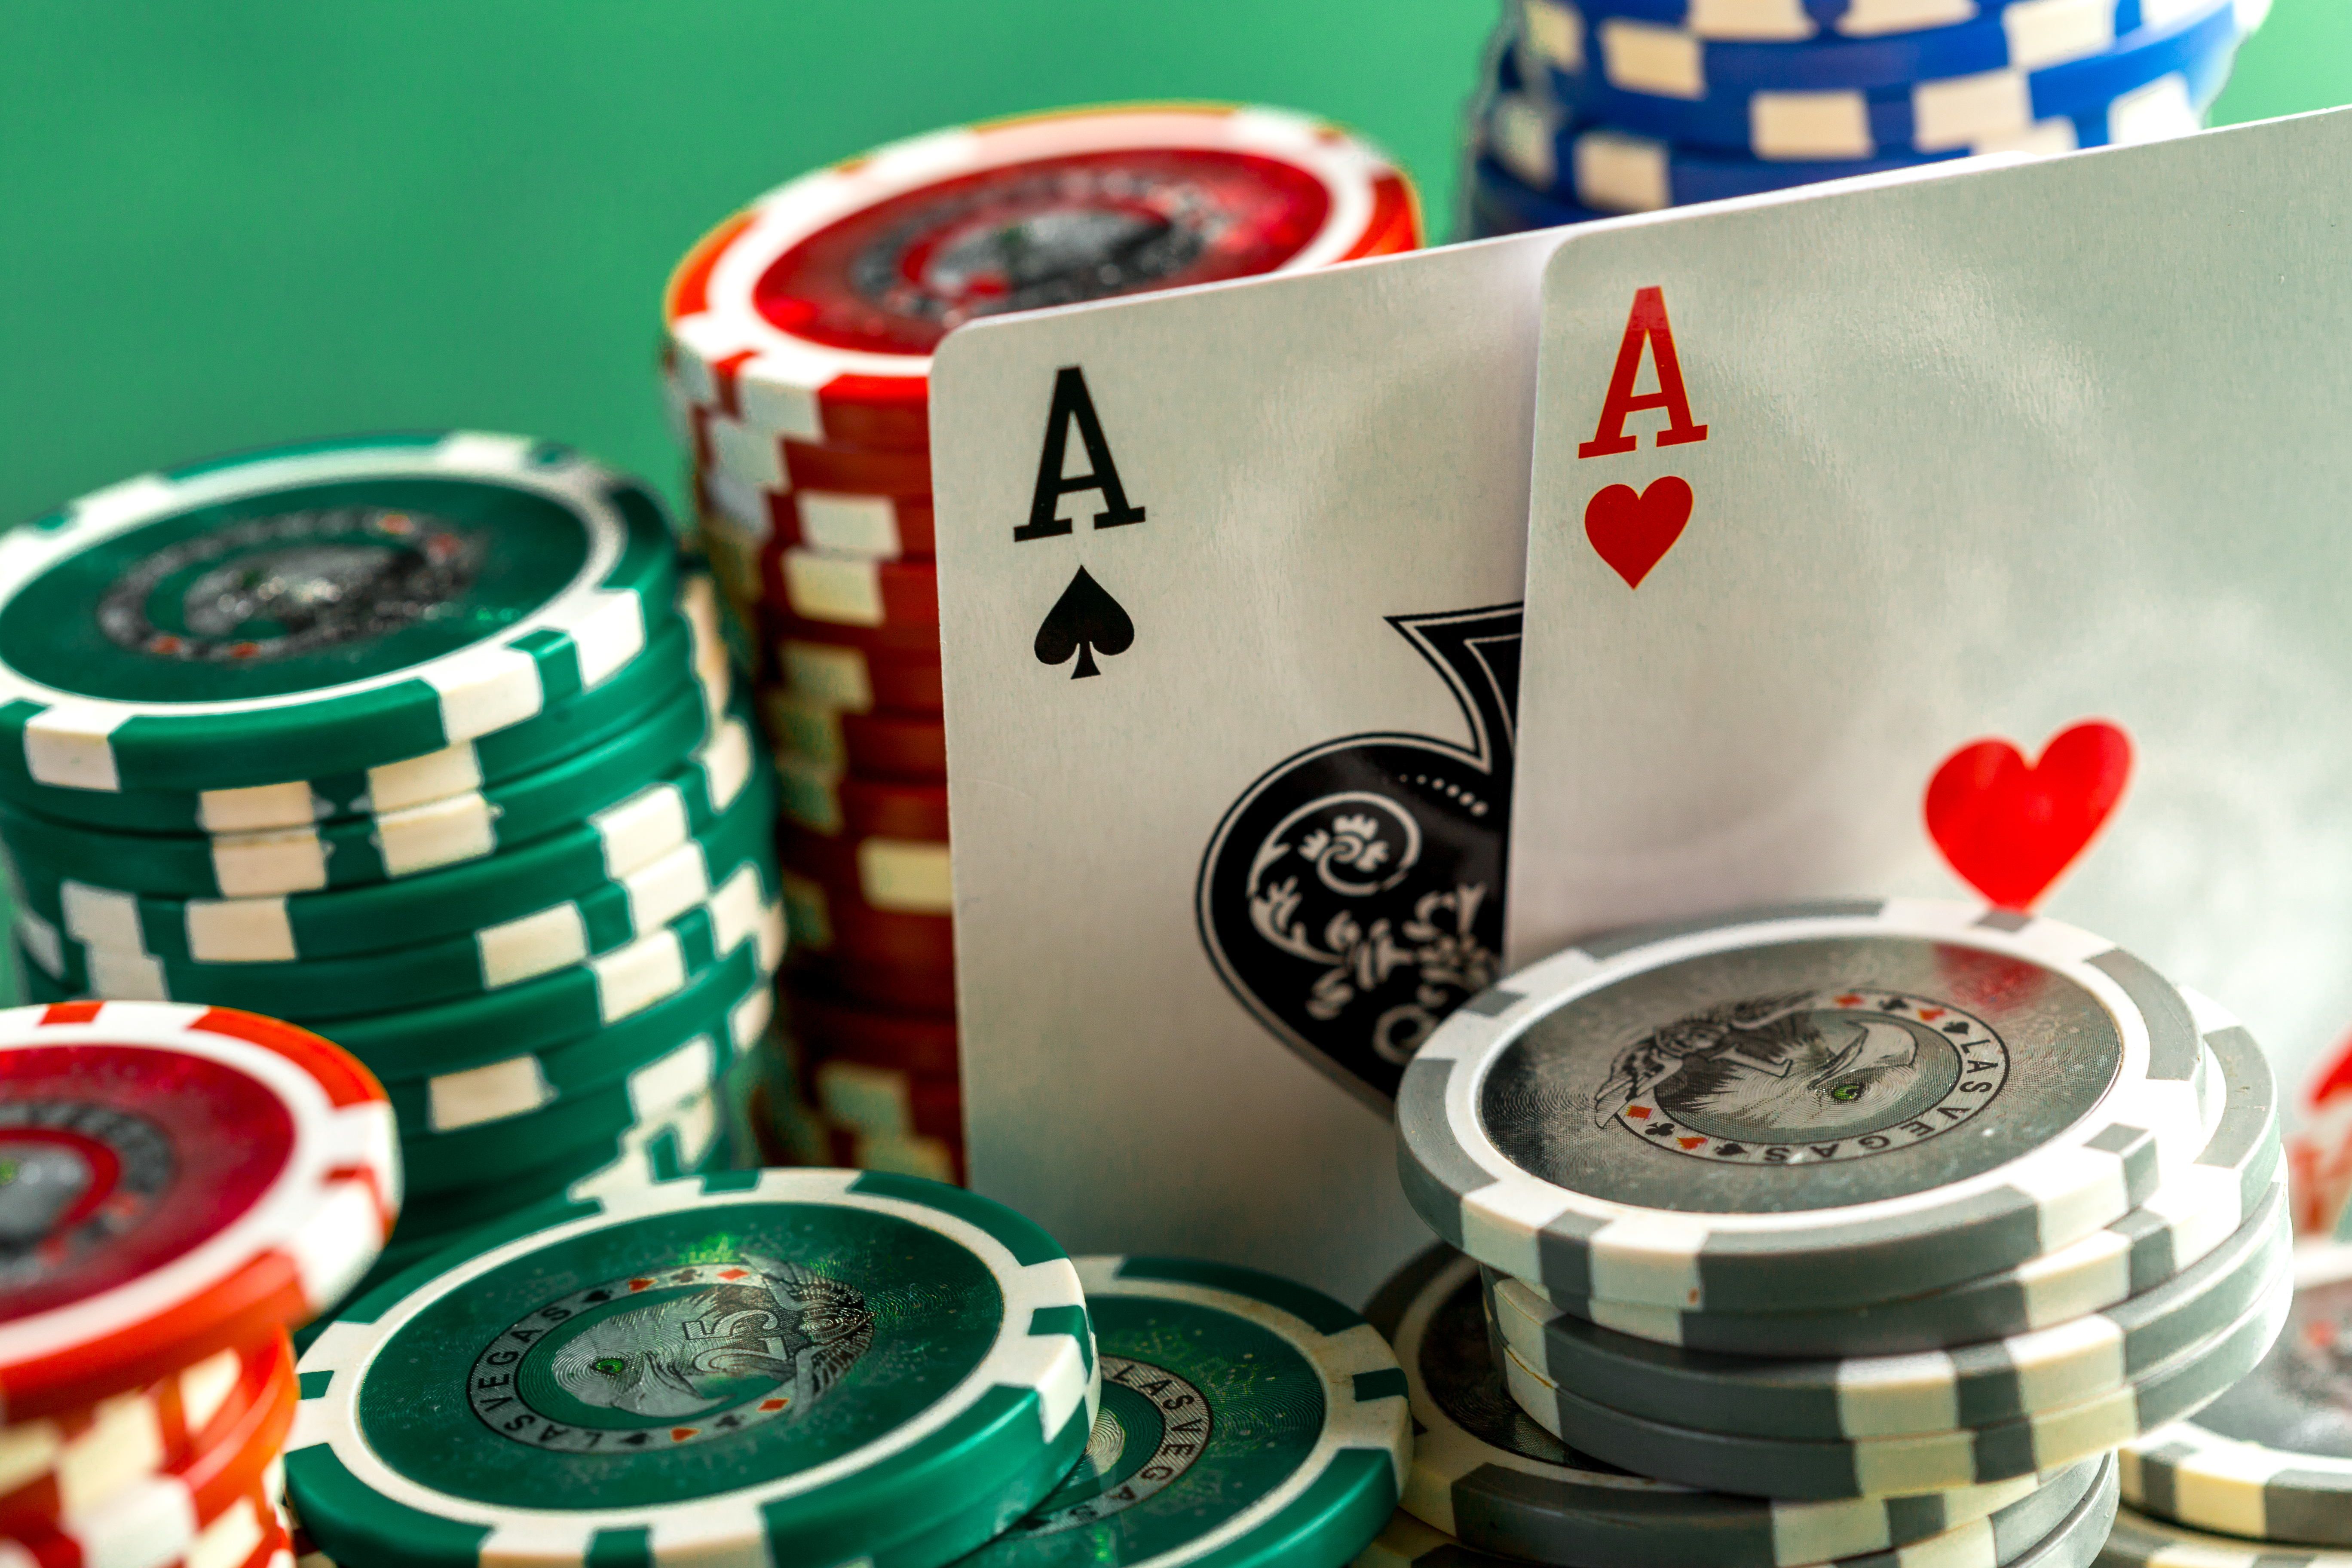 Are You Thinking of Opening a Gambling Business? Read This First!